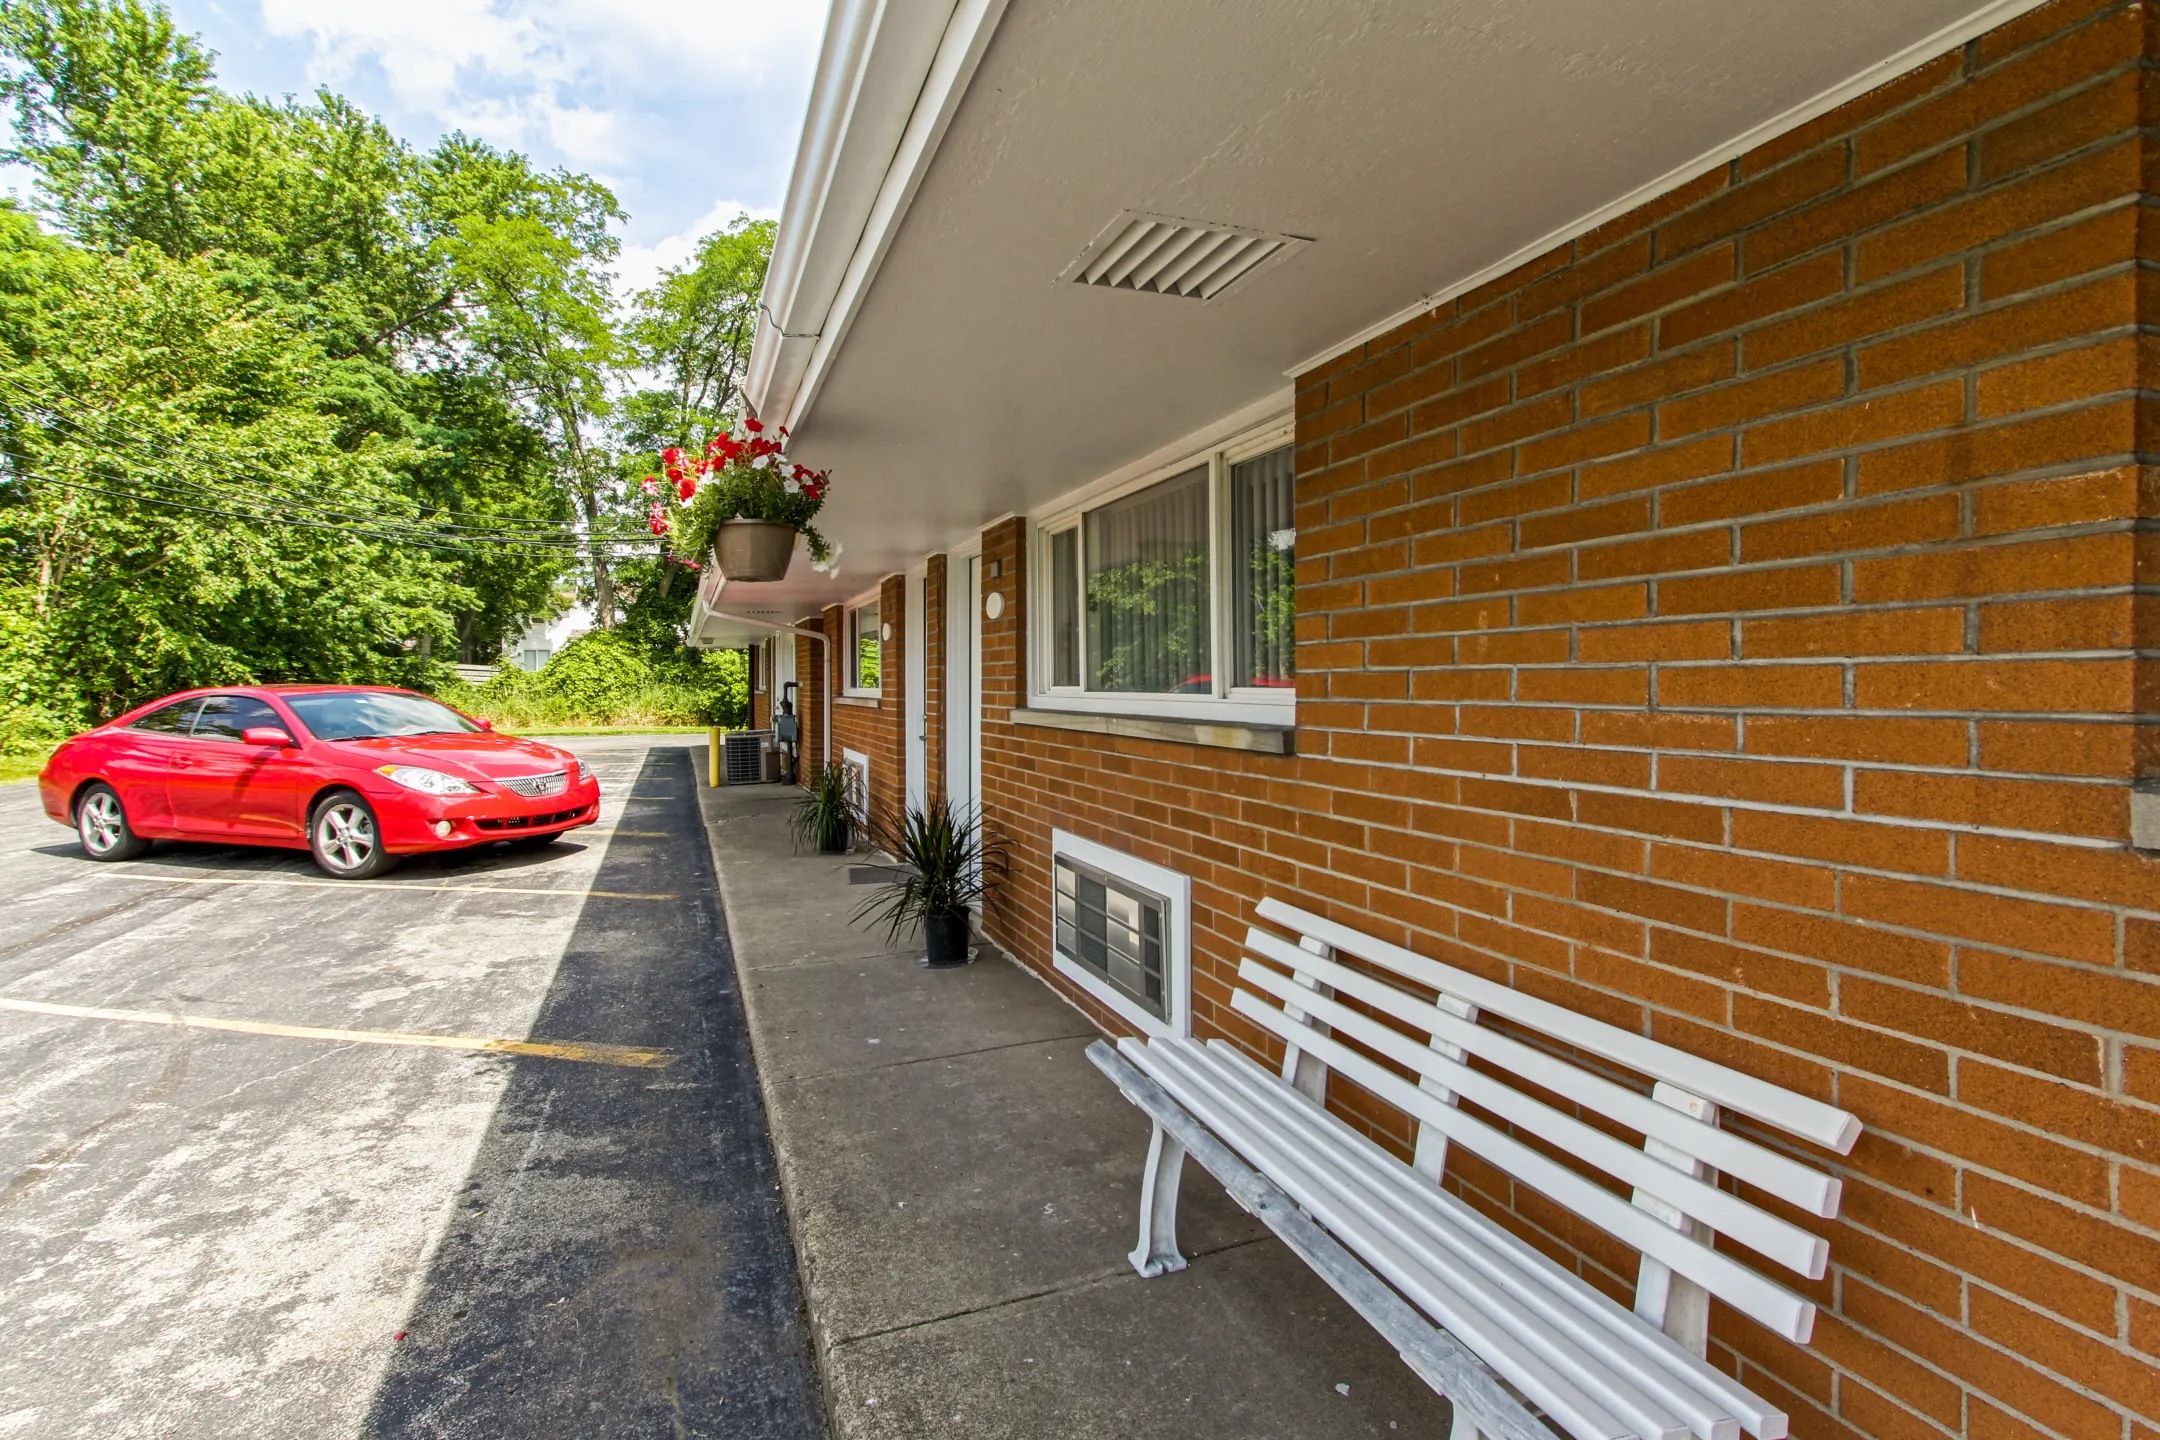 Patio / Deck - Woodworth Park Apartments - North Lima, OH